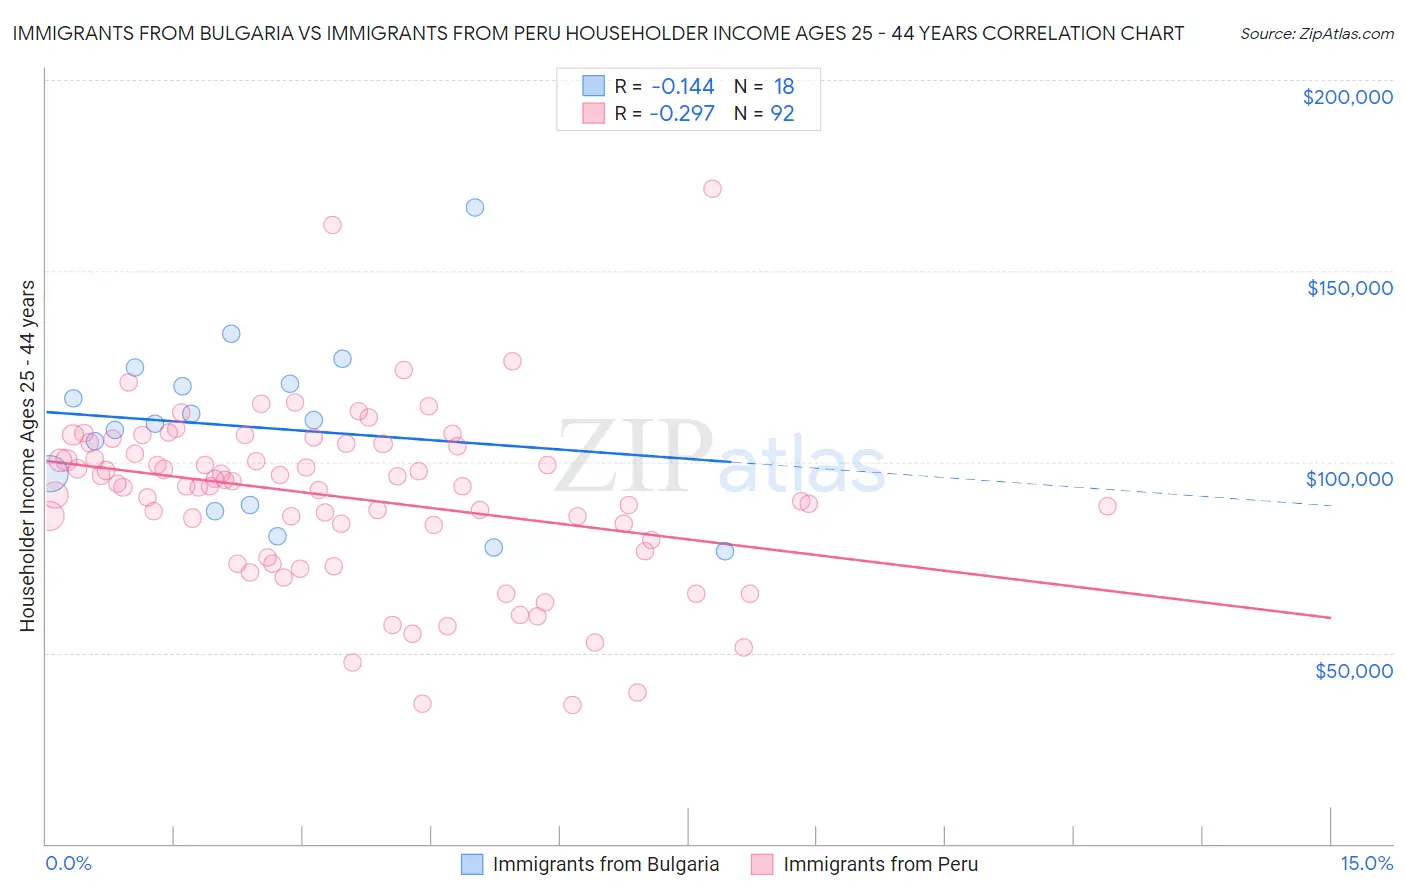 Immigrants from Bulgaria vs Immigrants from Peru Householder Income Ages 25 - 44 years